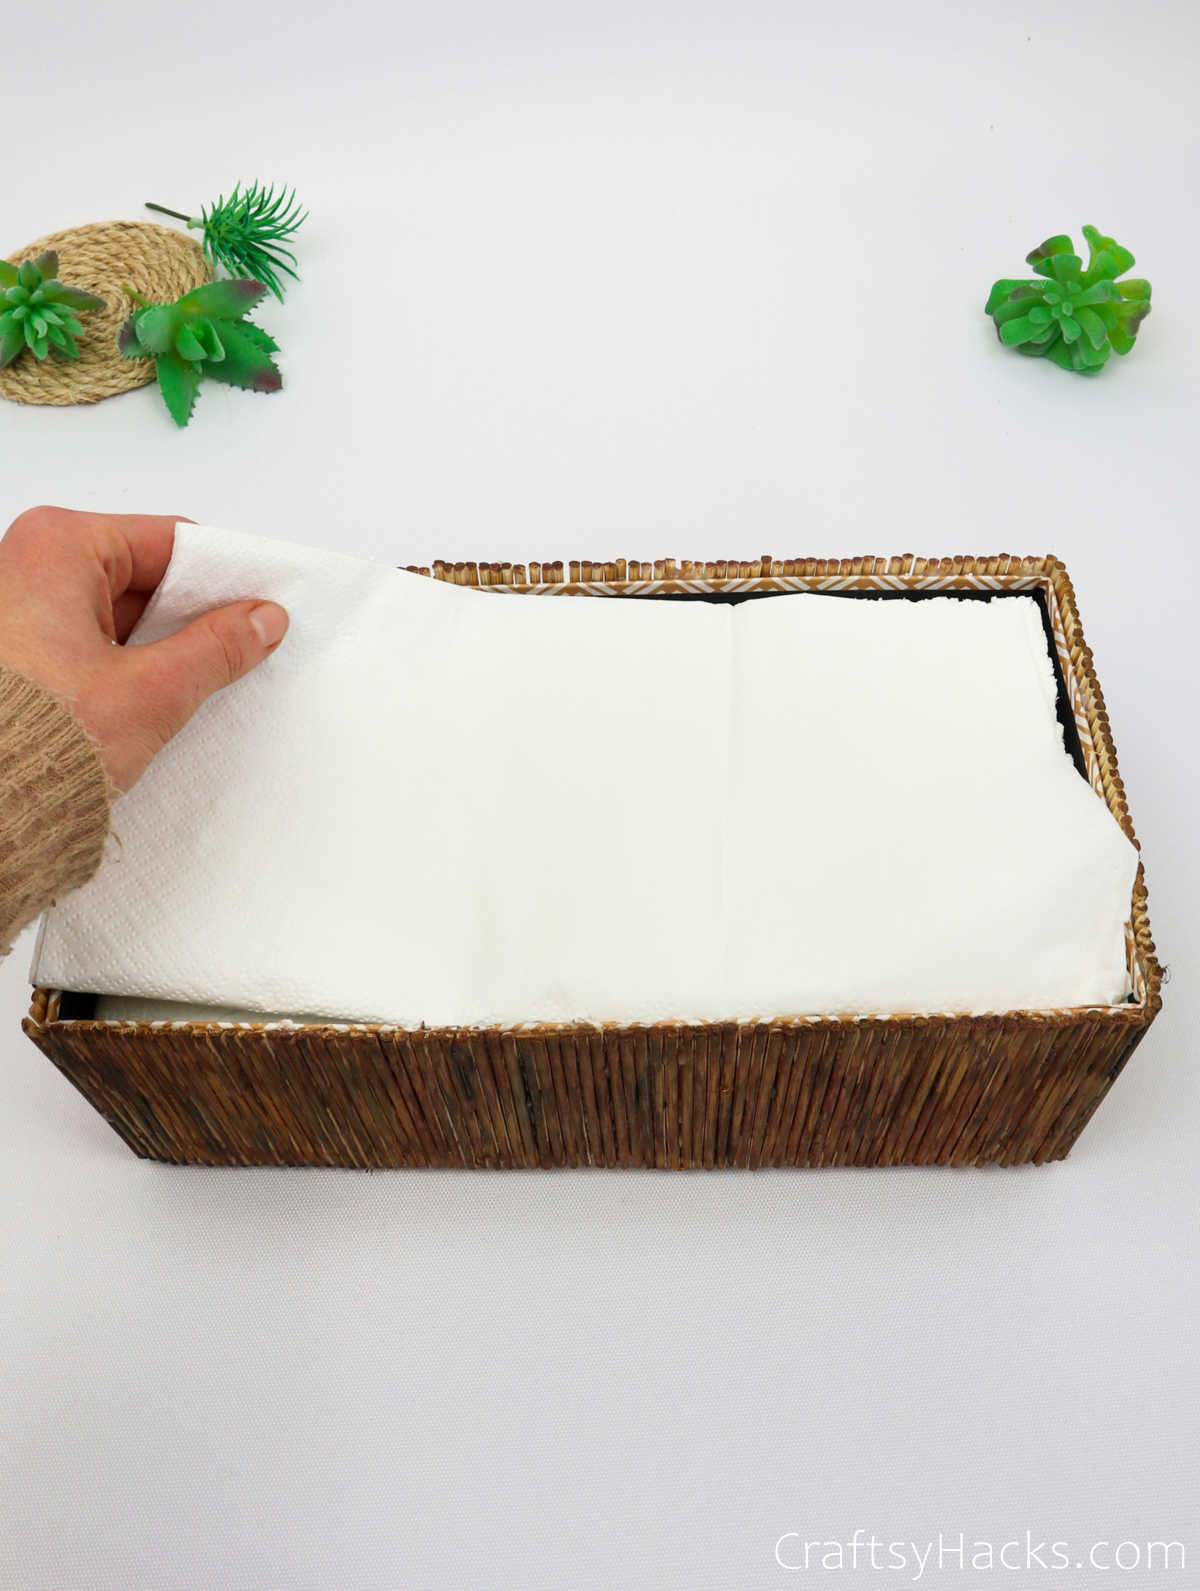 lining box with paper towel